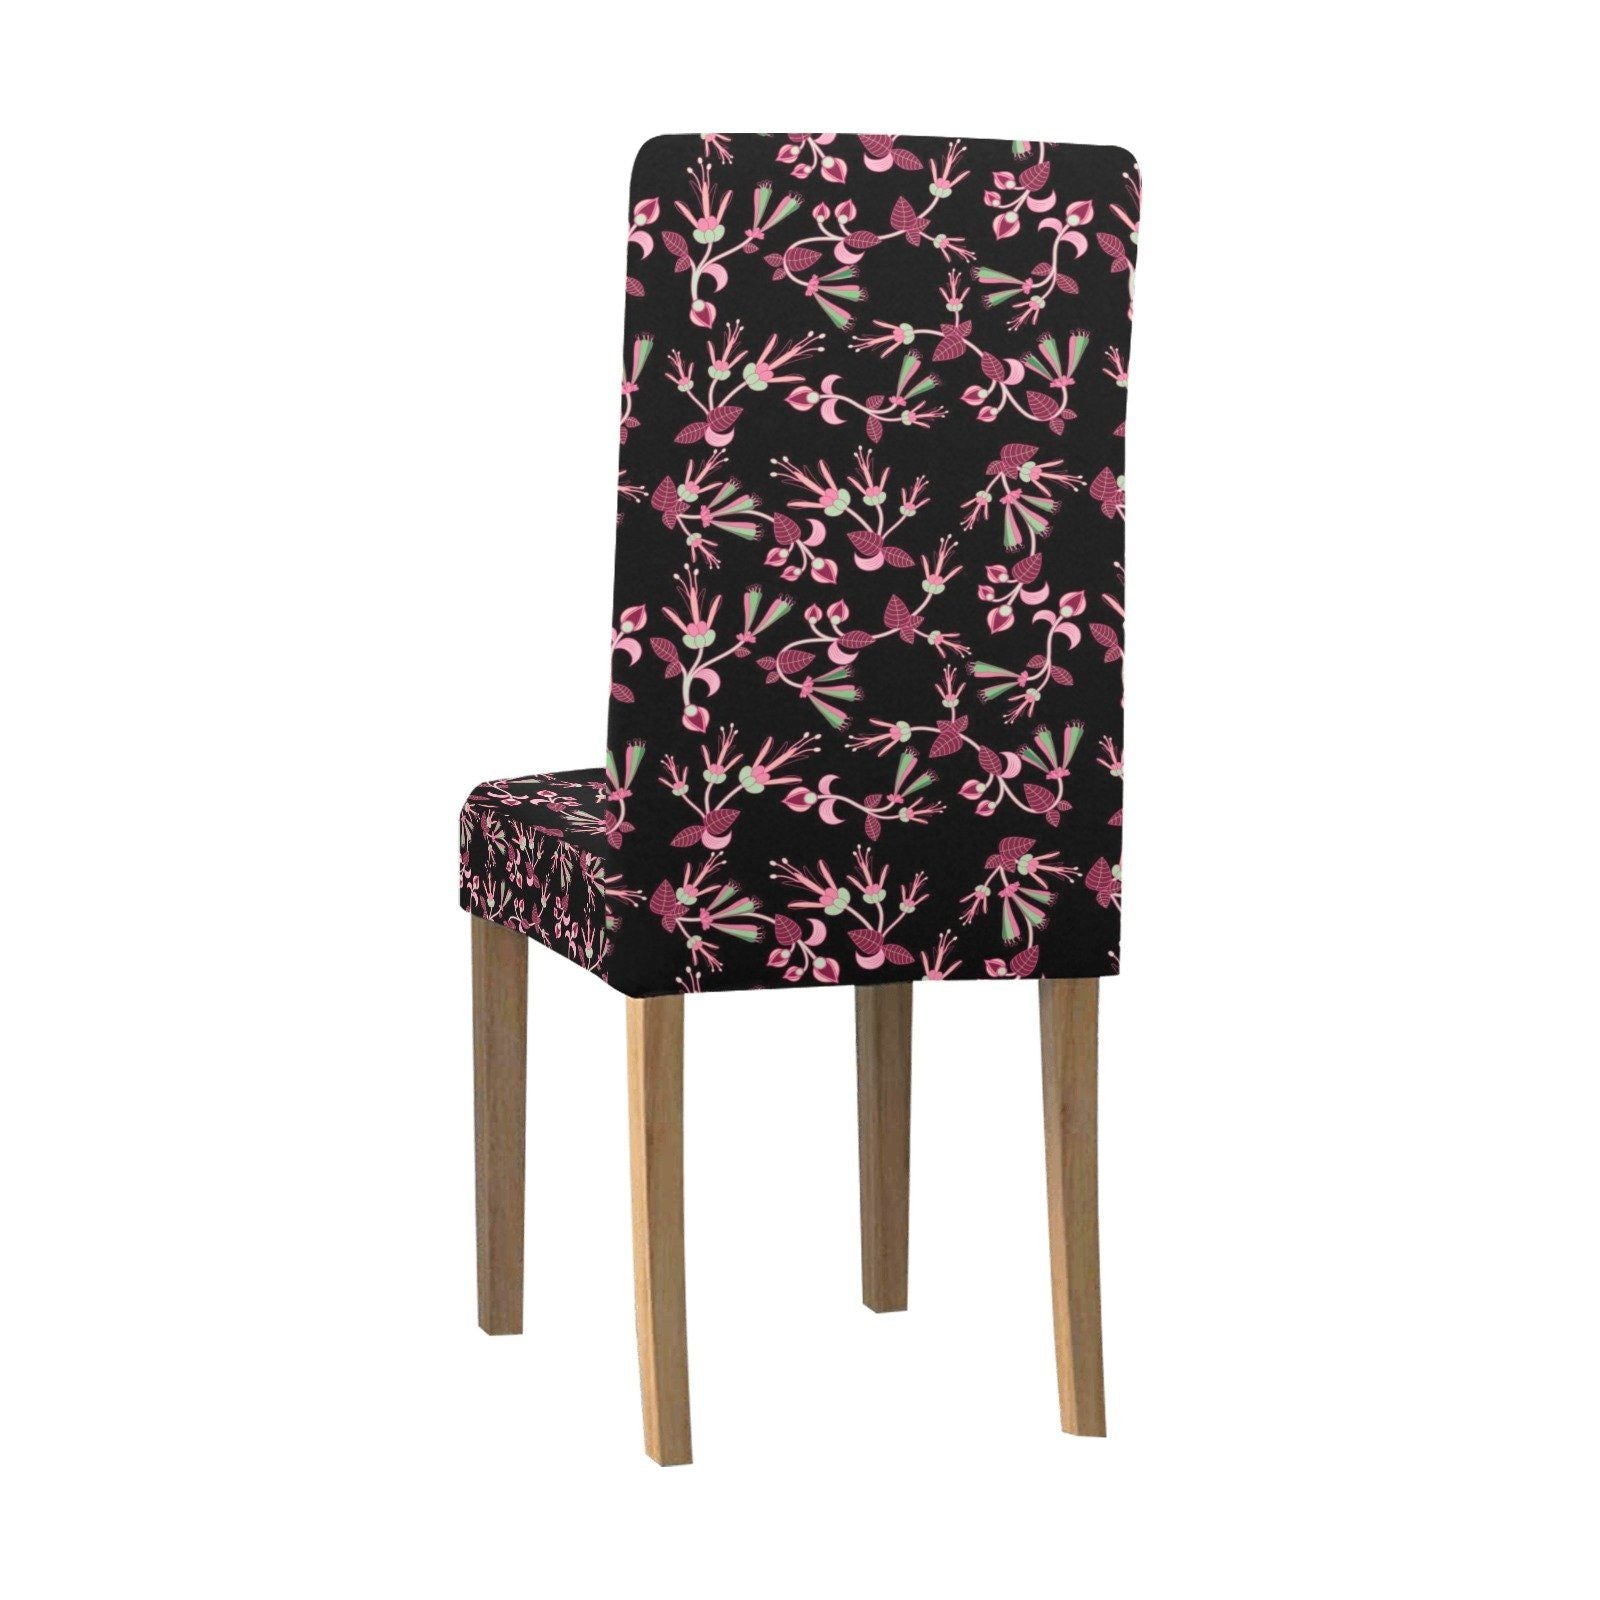 Floral Green Black Chair Cover (Pack of 4) Chair Cover (Pack of 4) e-joyer 